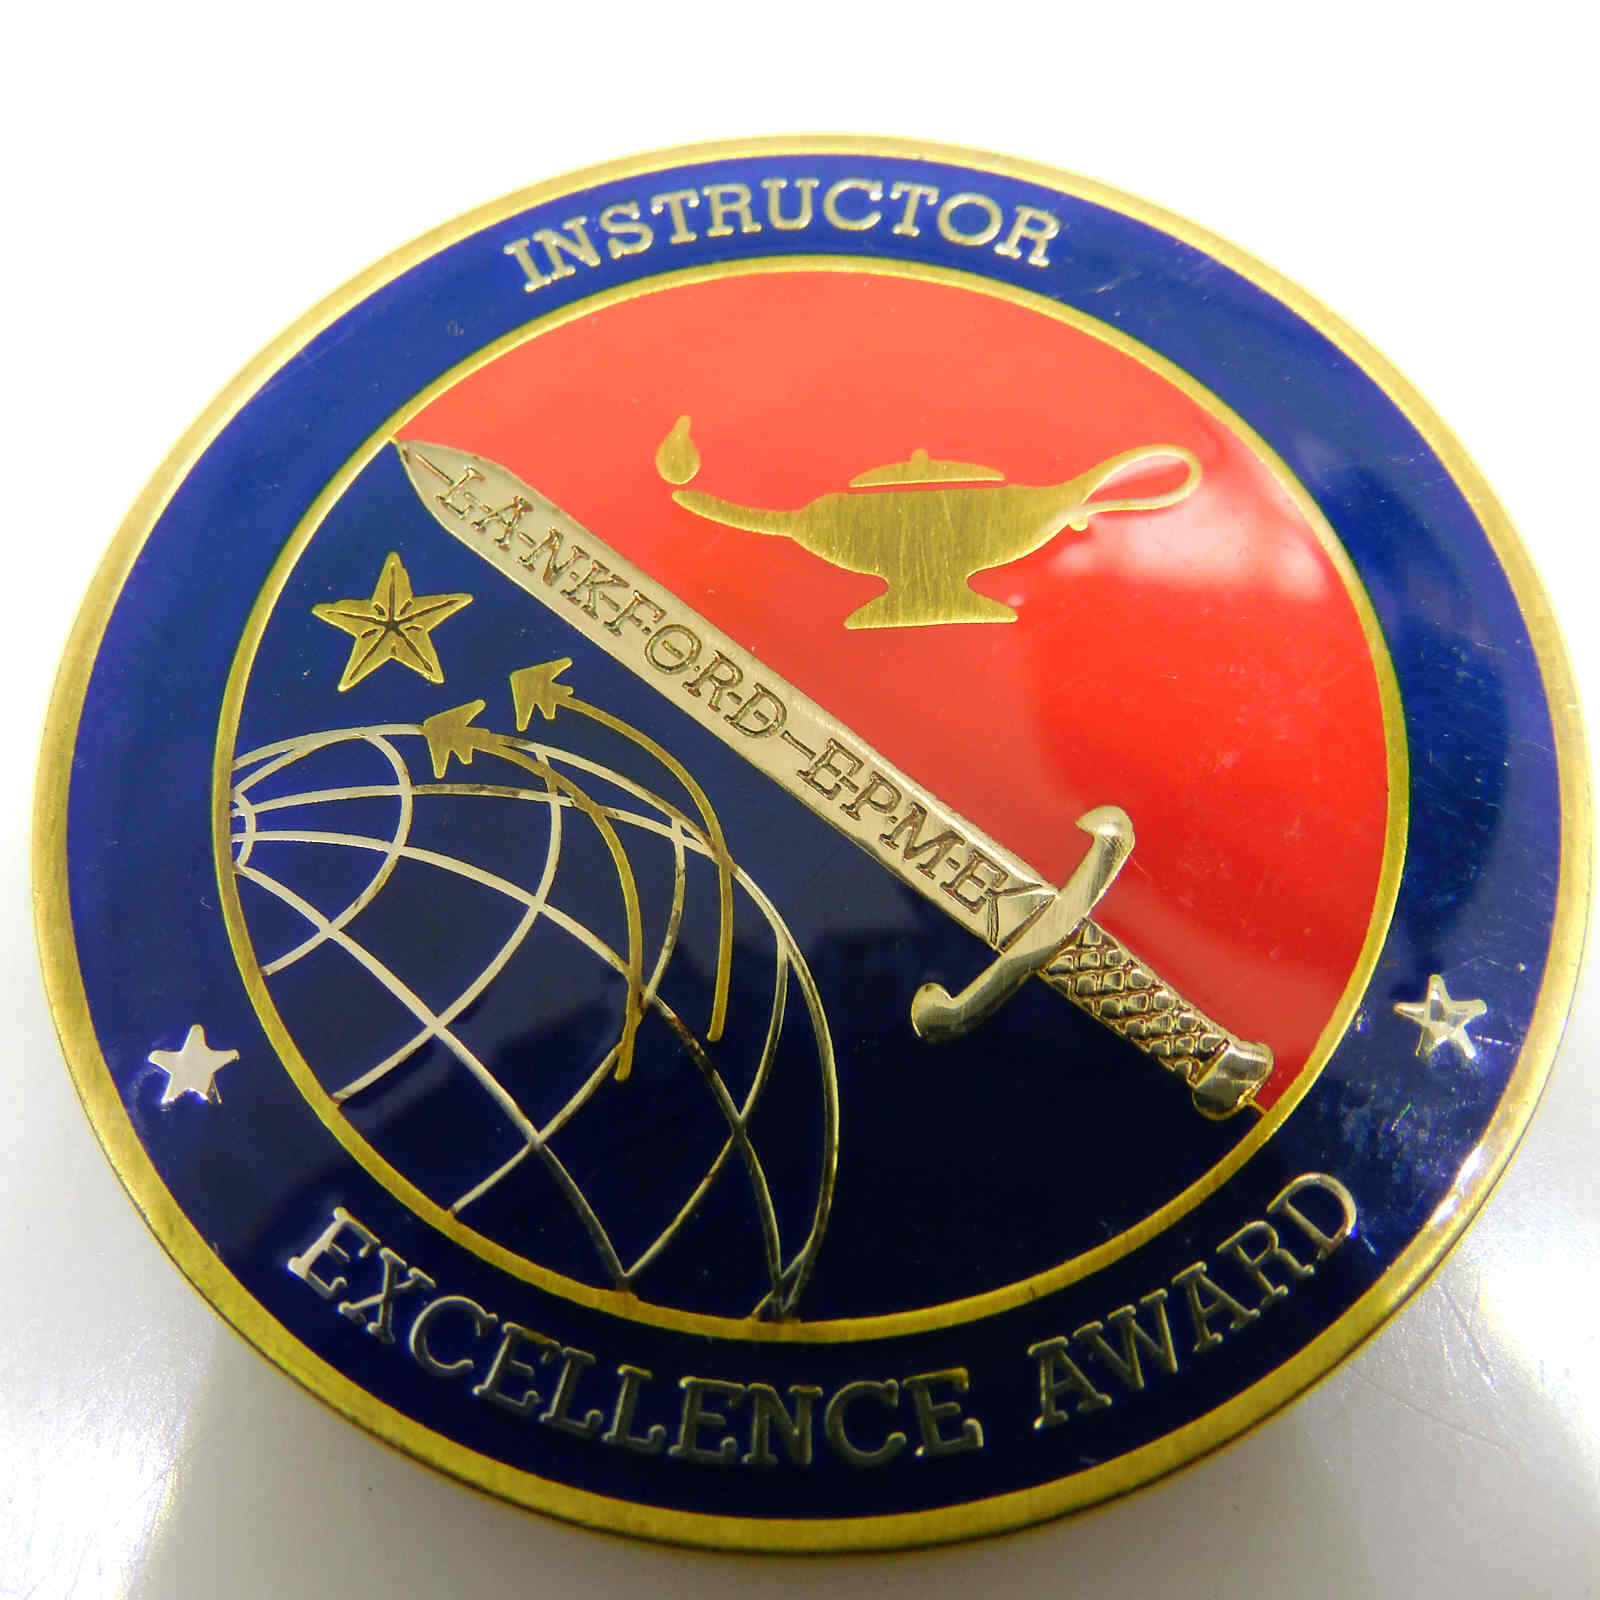 USAF INSTRUCTOR EXCELLENCE AWARD CHALLENGE COIN